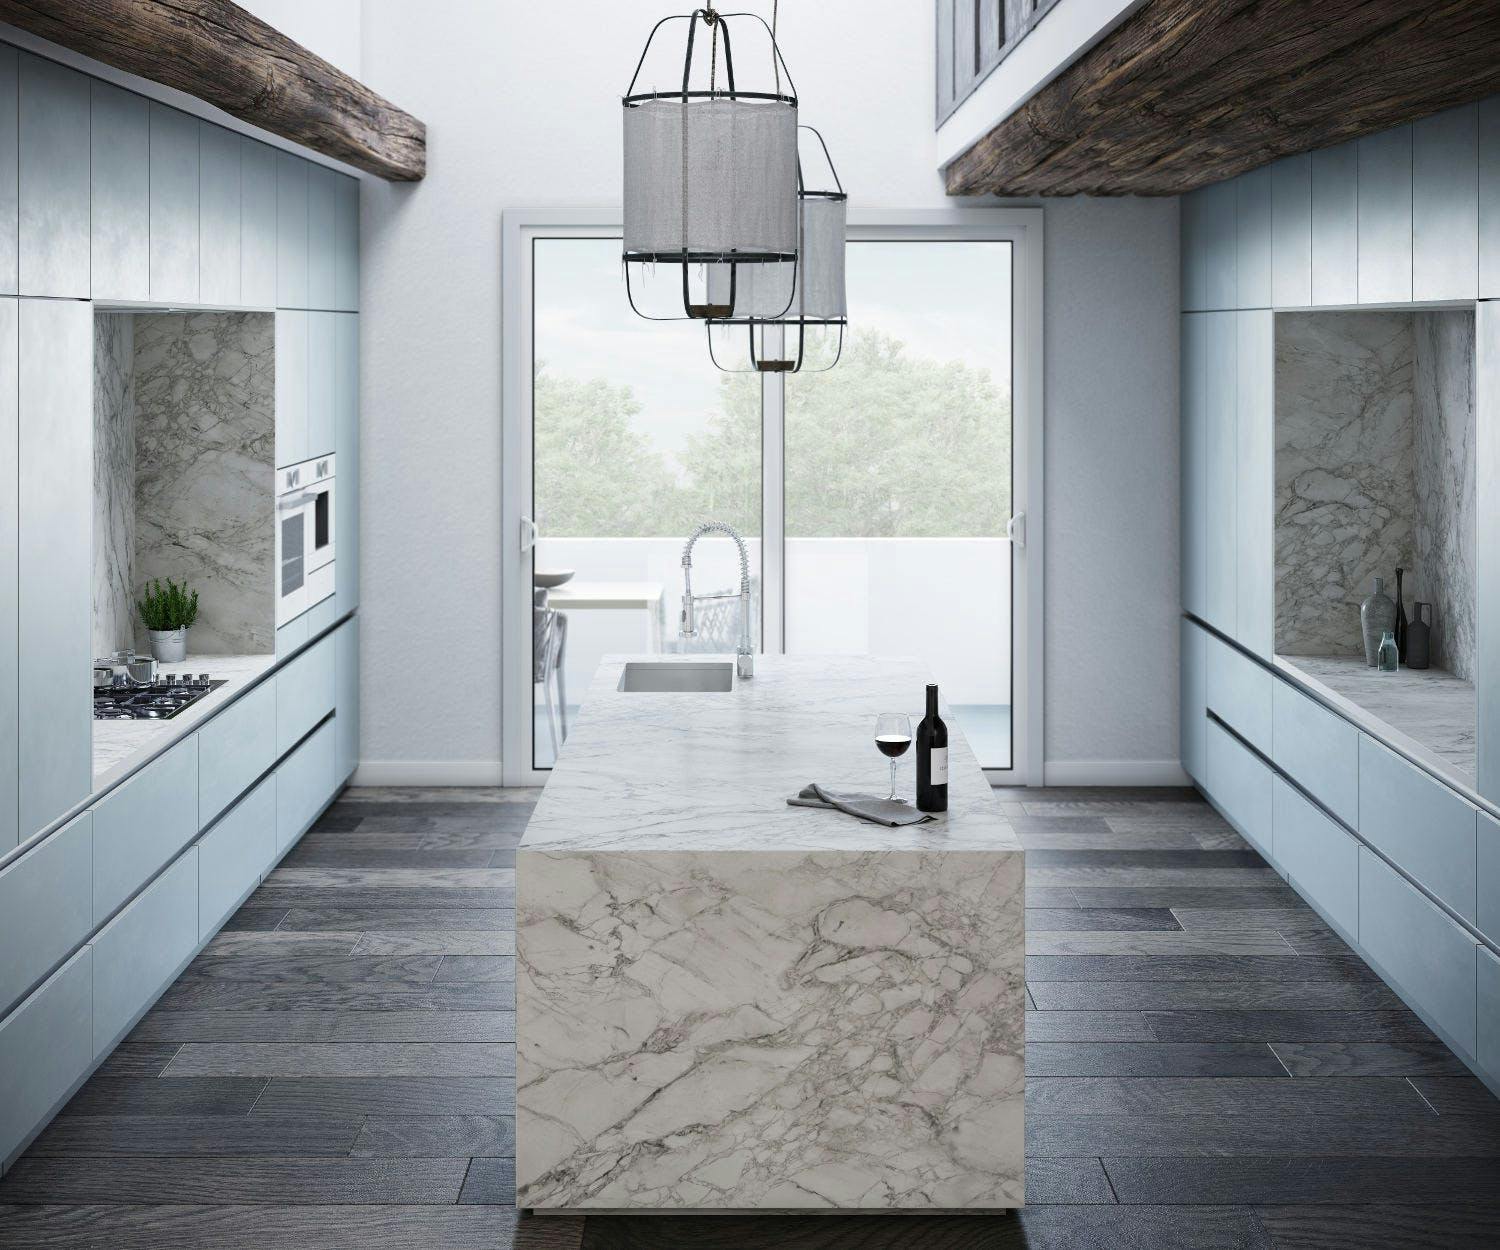 Image 40 of Dekton Kitchen Portum Velvet 1 in Compact kitchens: Who says they're a disadvantage? - Cosentino